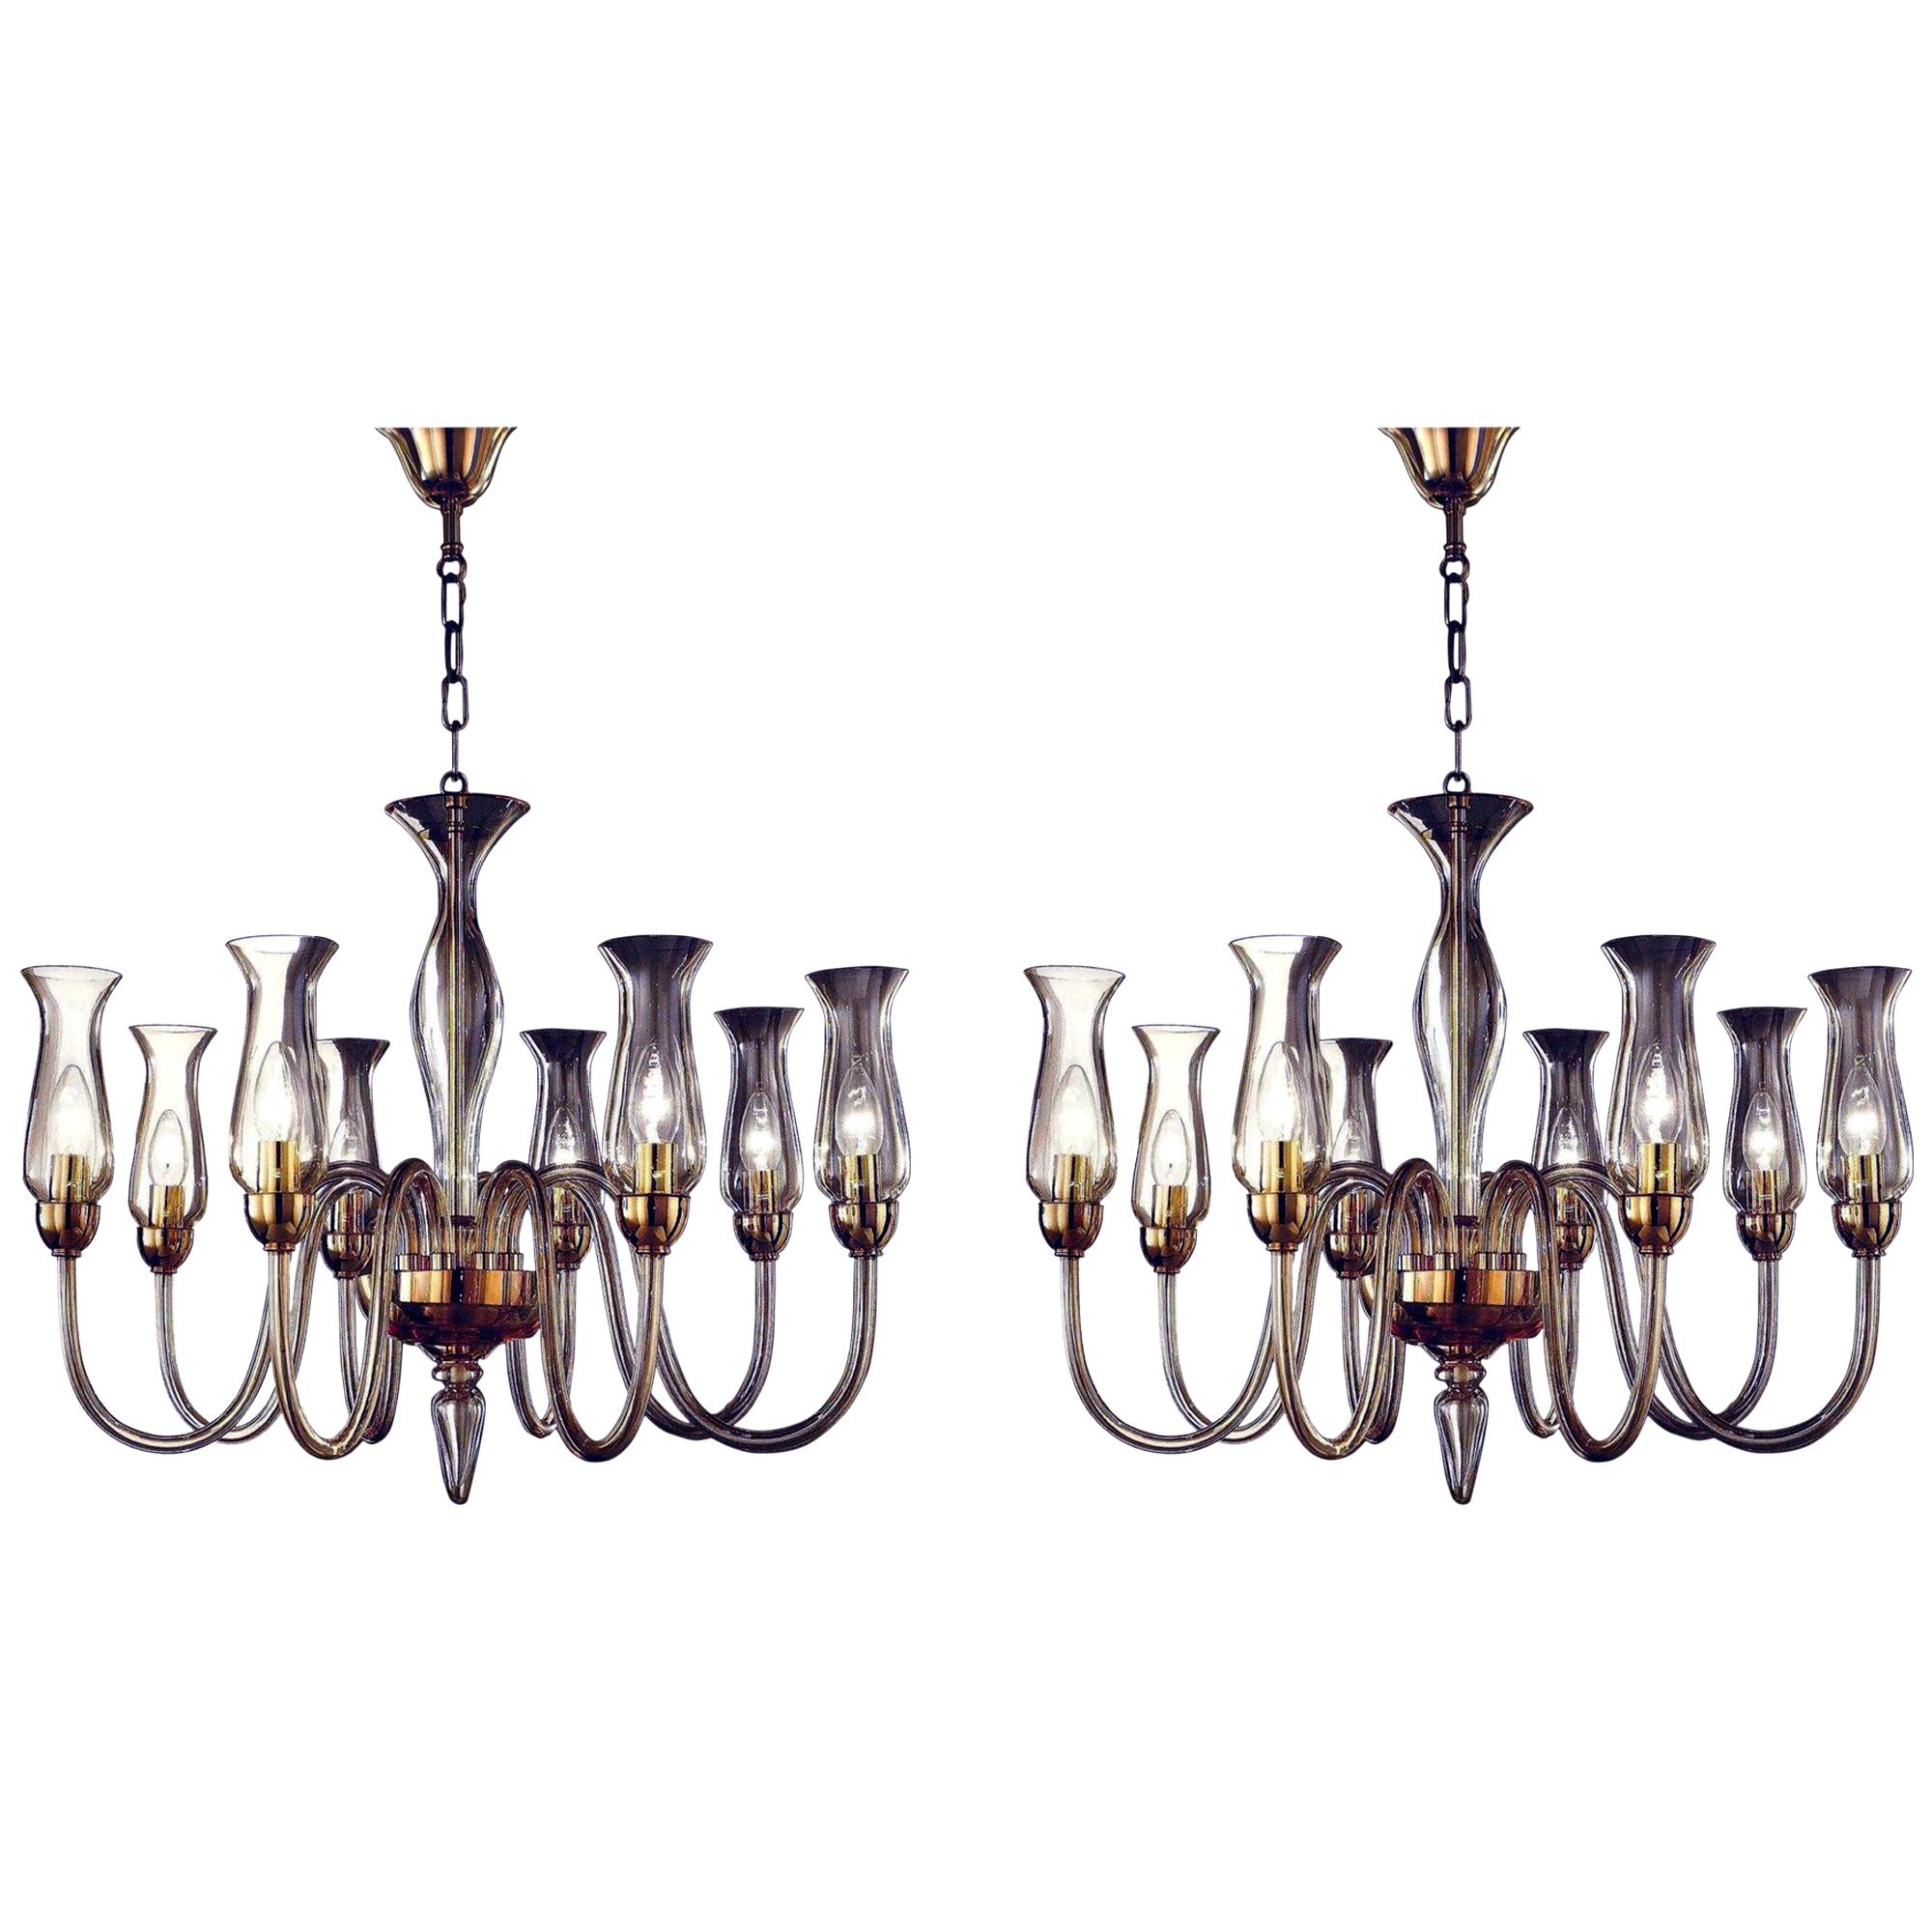 Two Italian Modern Neoclassical Amber Murano Glass Chandeliers with Glass Shades For Sale